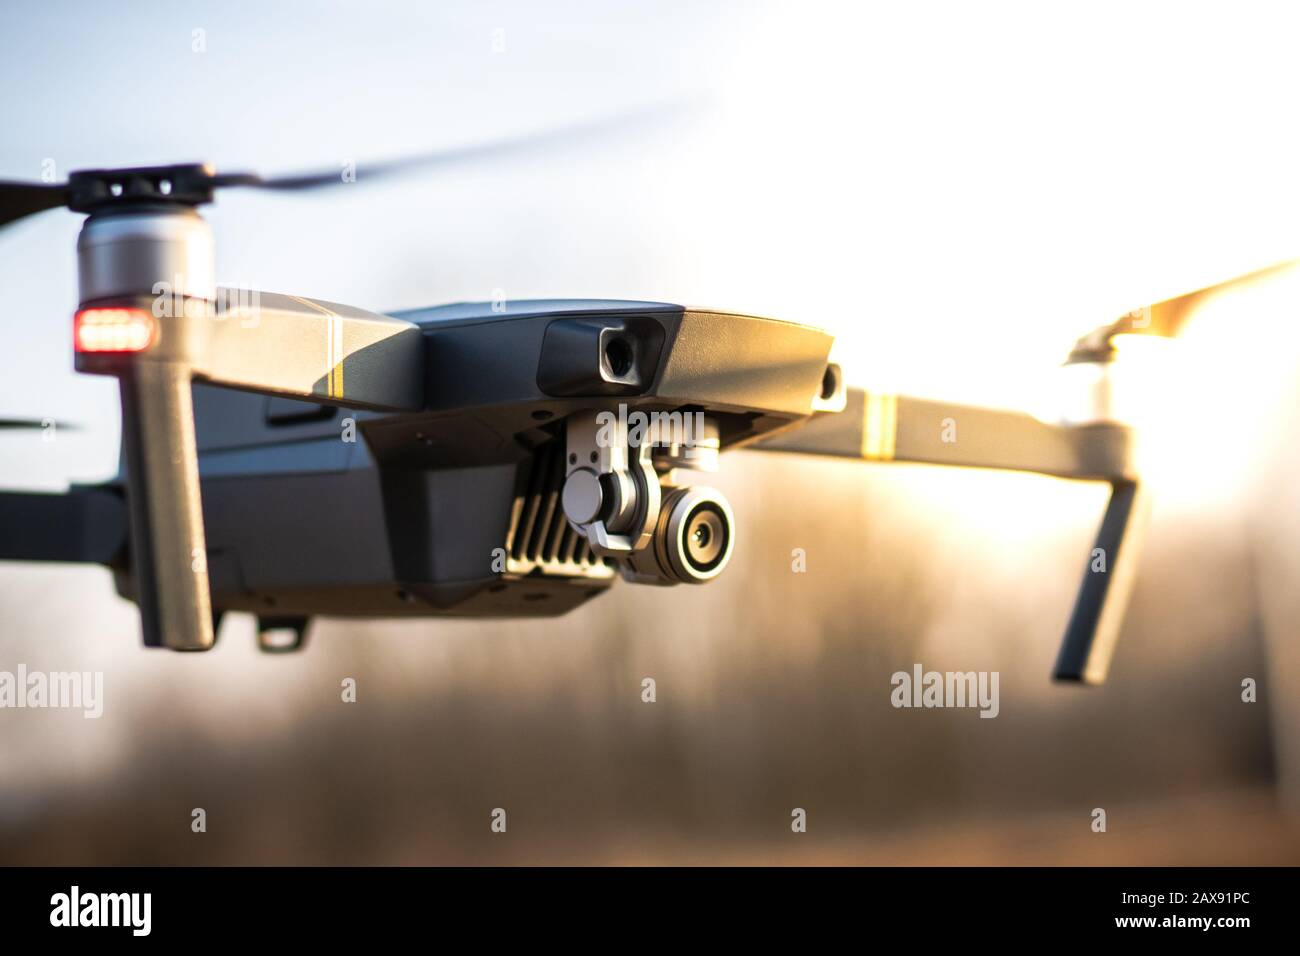 Flying drone with sunset view. Stock Photo